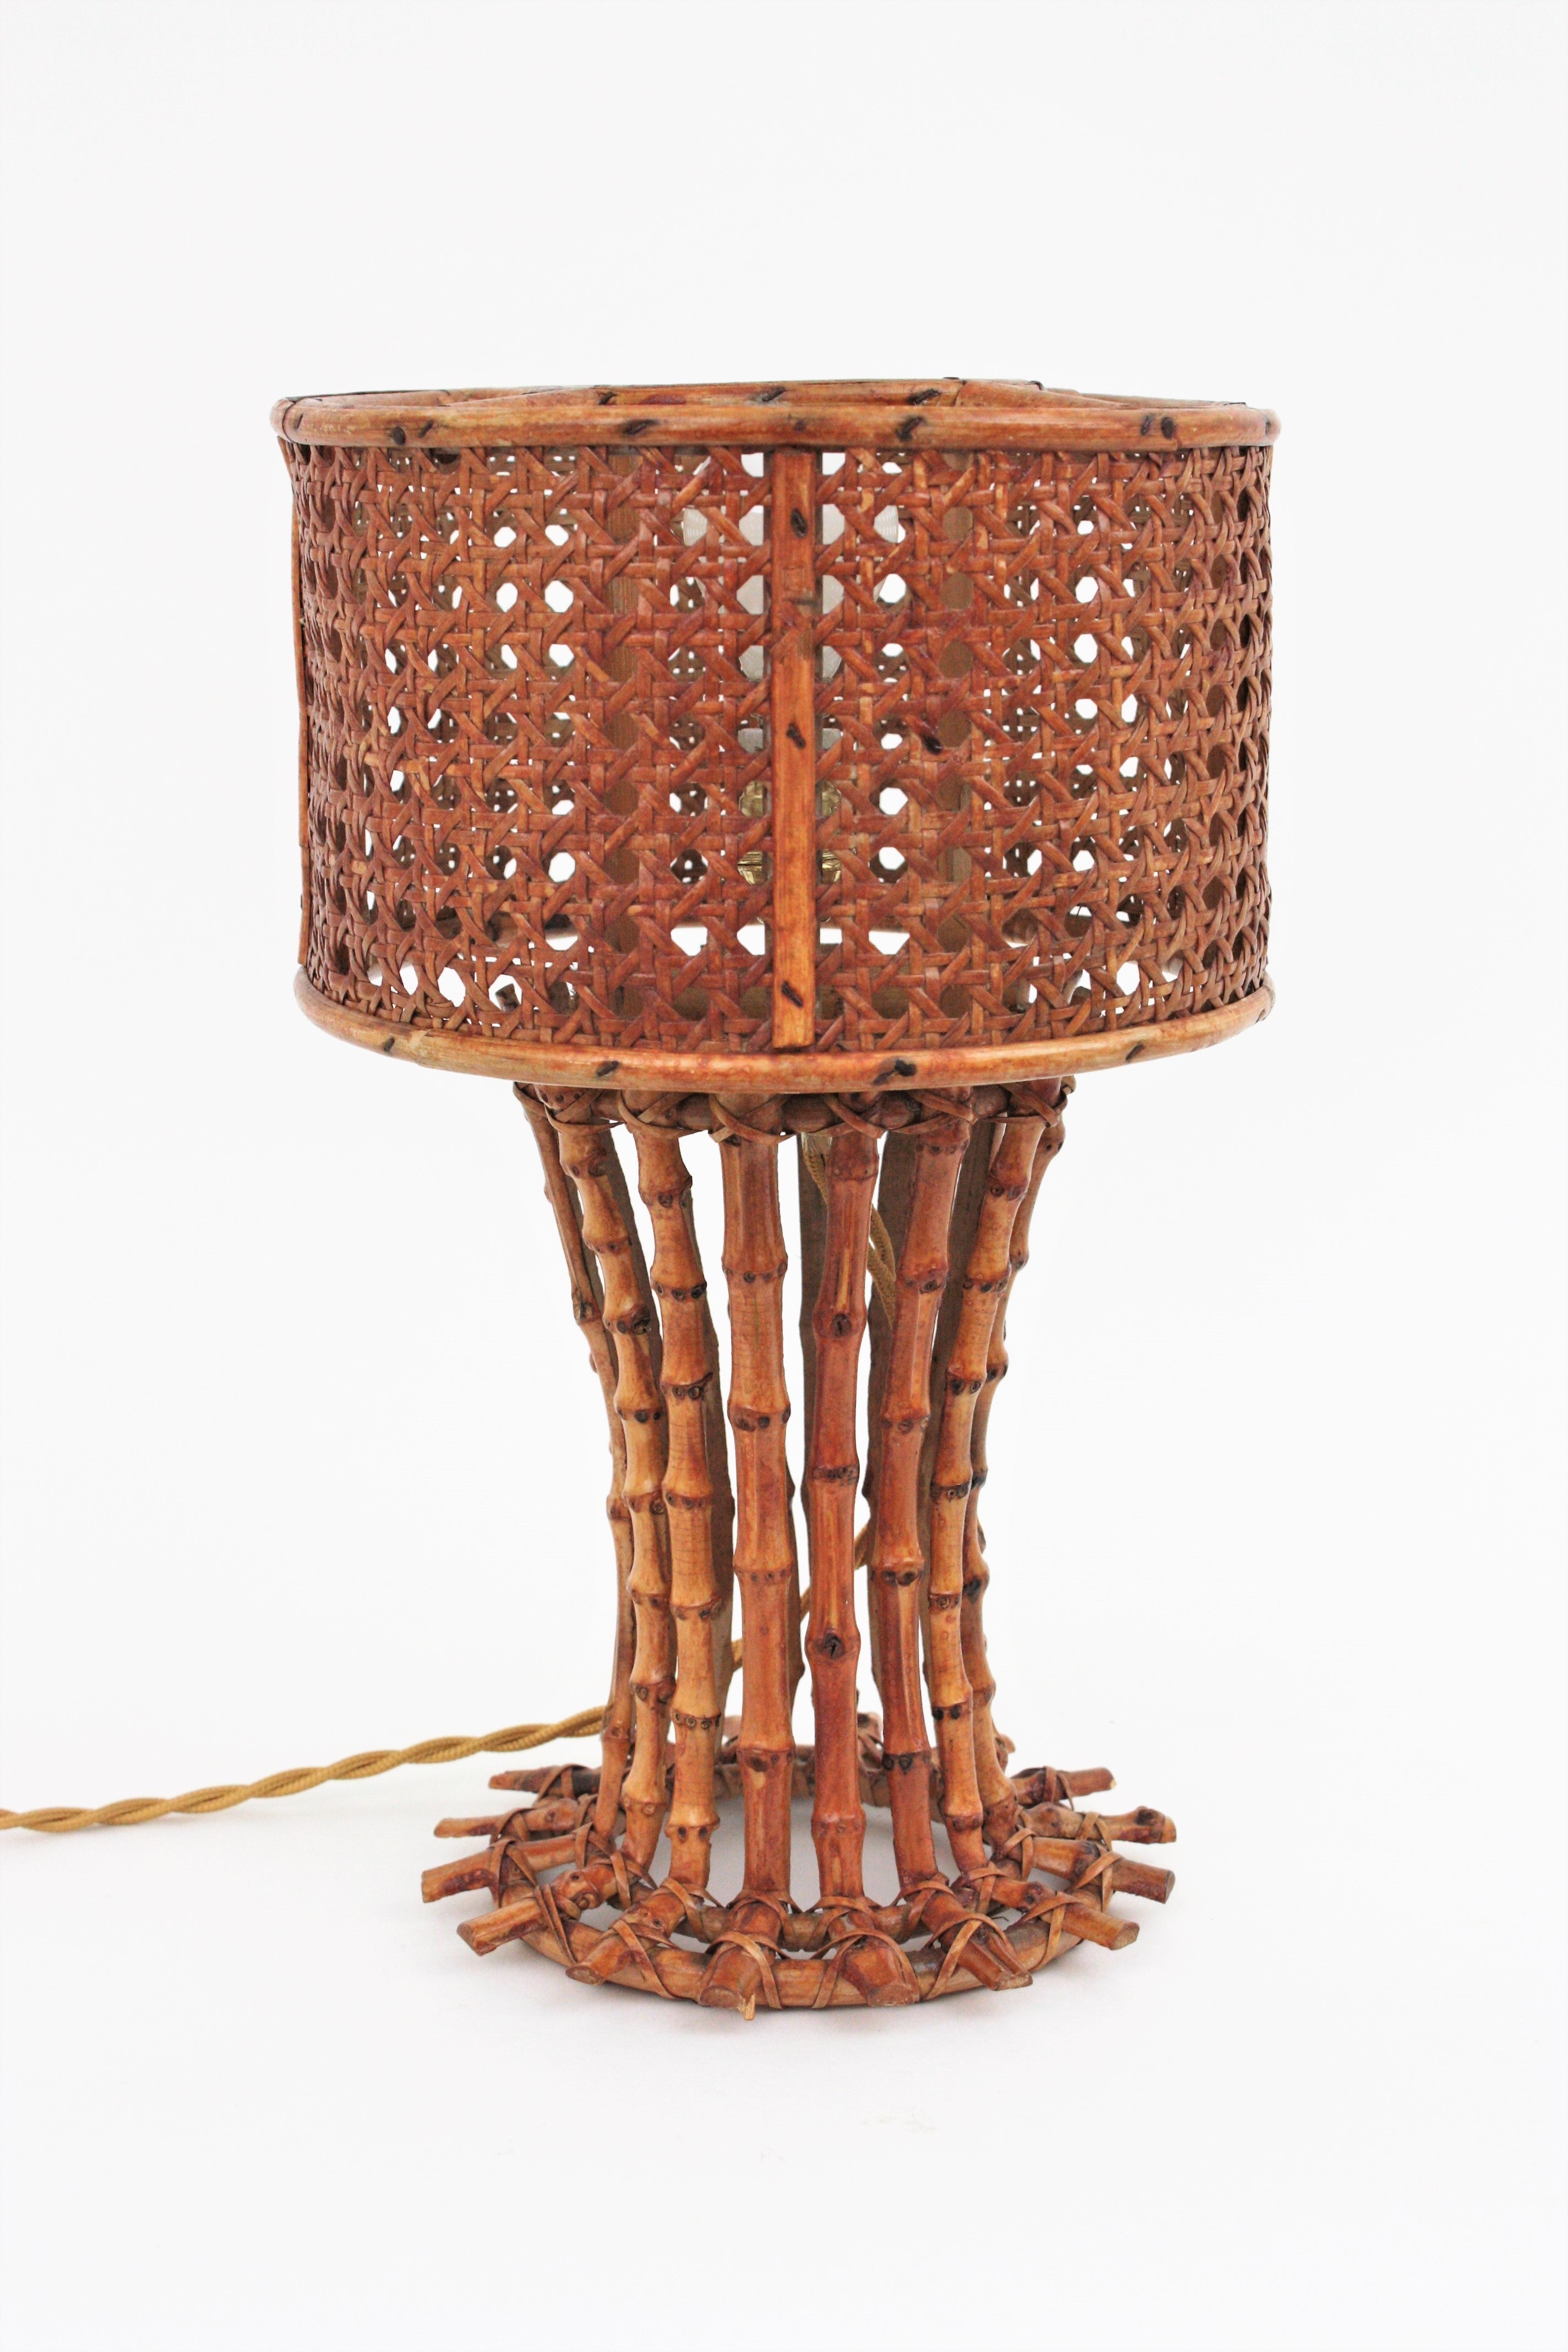 Eyecatching bamboo and rattan table lamp with woven wicker wire shade, Italy, 1950s-1960s.
This lovely table lamp features a bamboo cane structure holding a wicker weave cylinder shade. 
Handcrafted in Italy at the mid-20th century period it